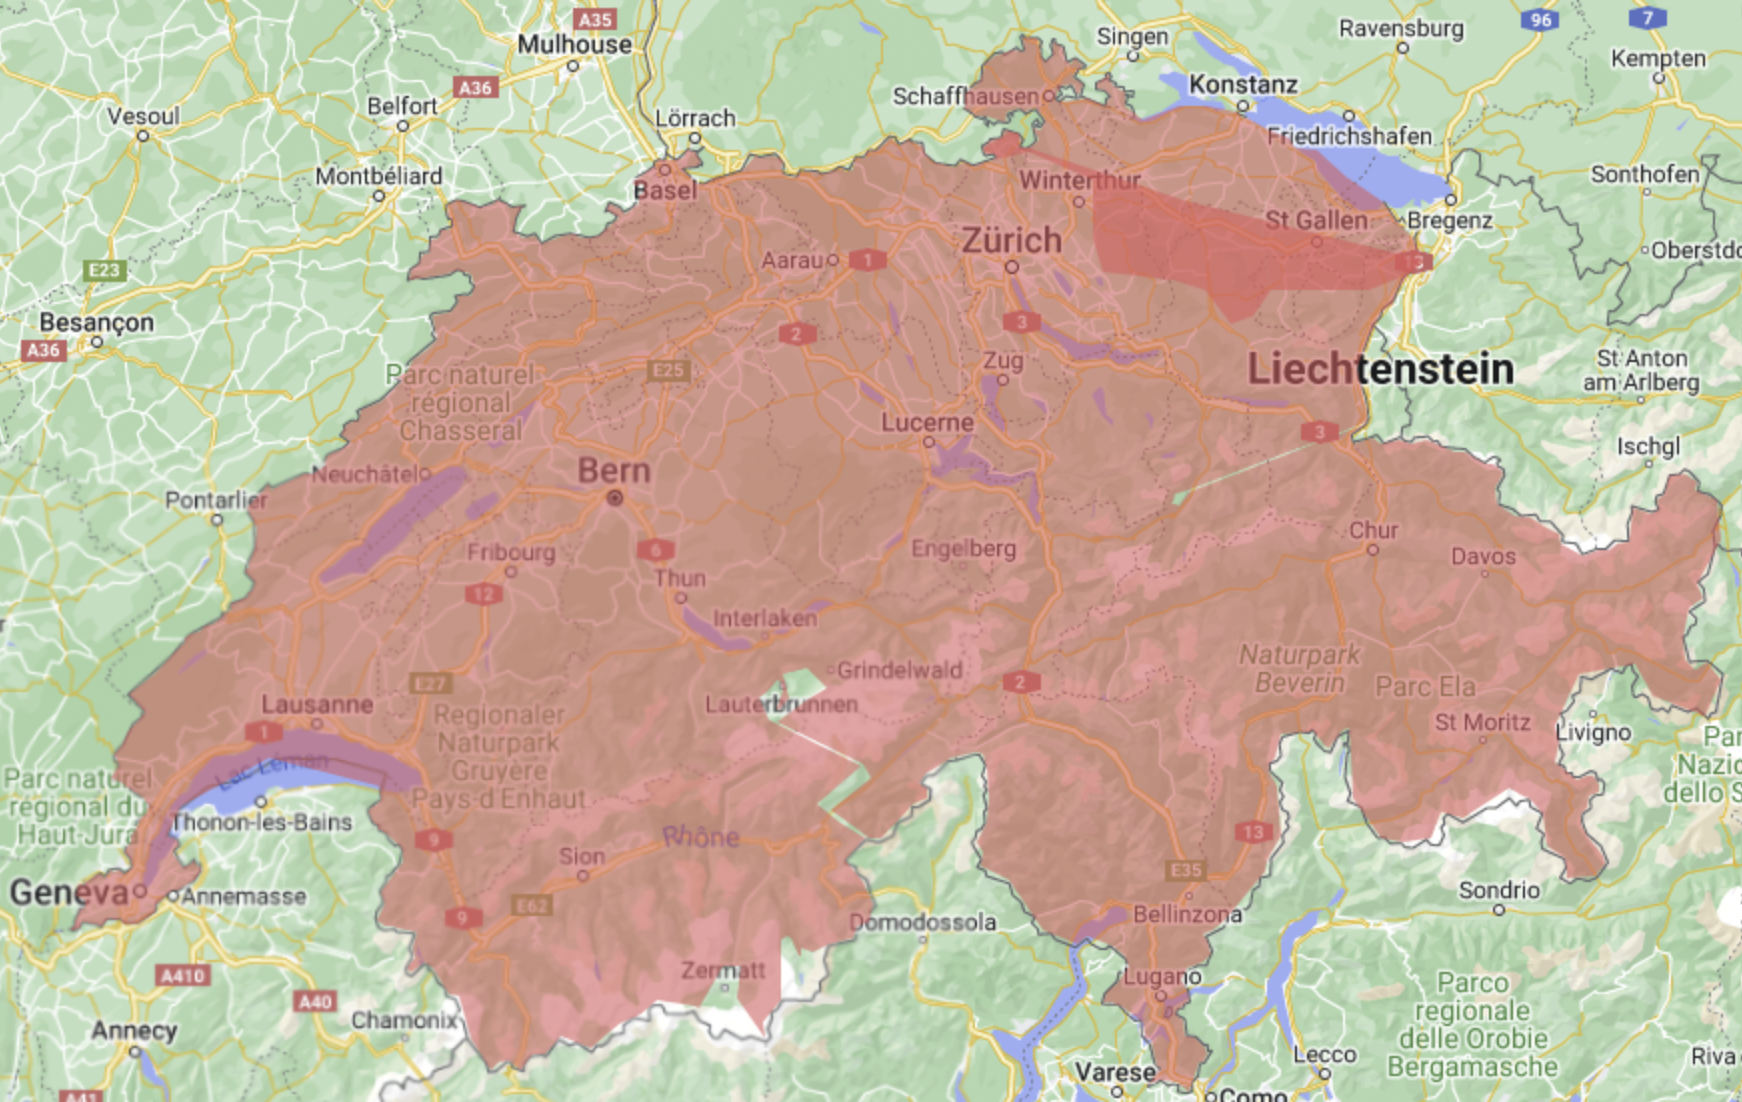 ZRH_coverage_area.png